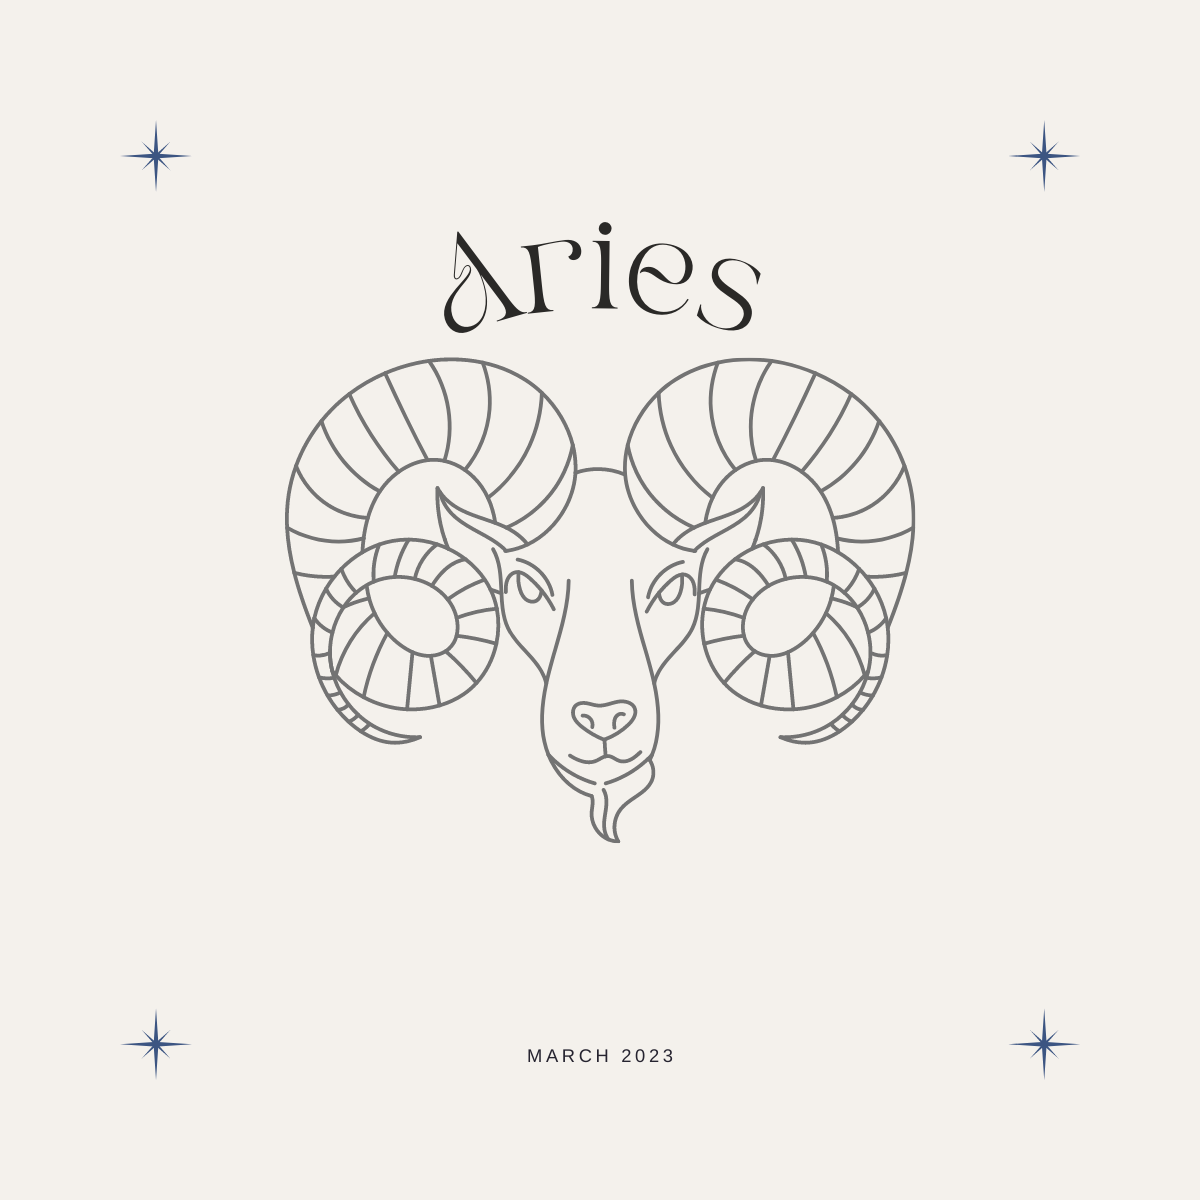 Aries (March 2023 - April 2023)